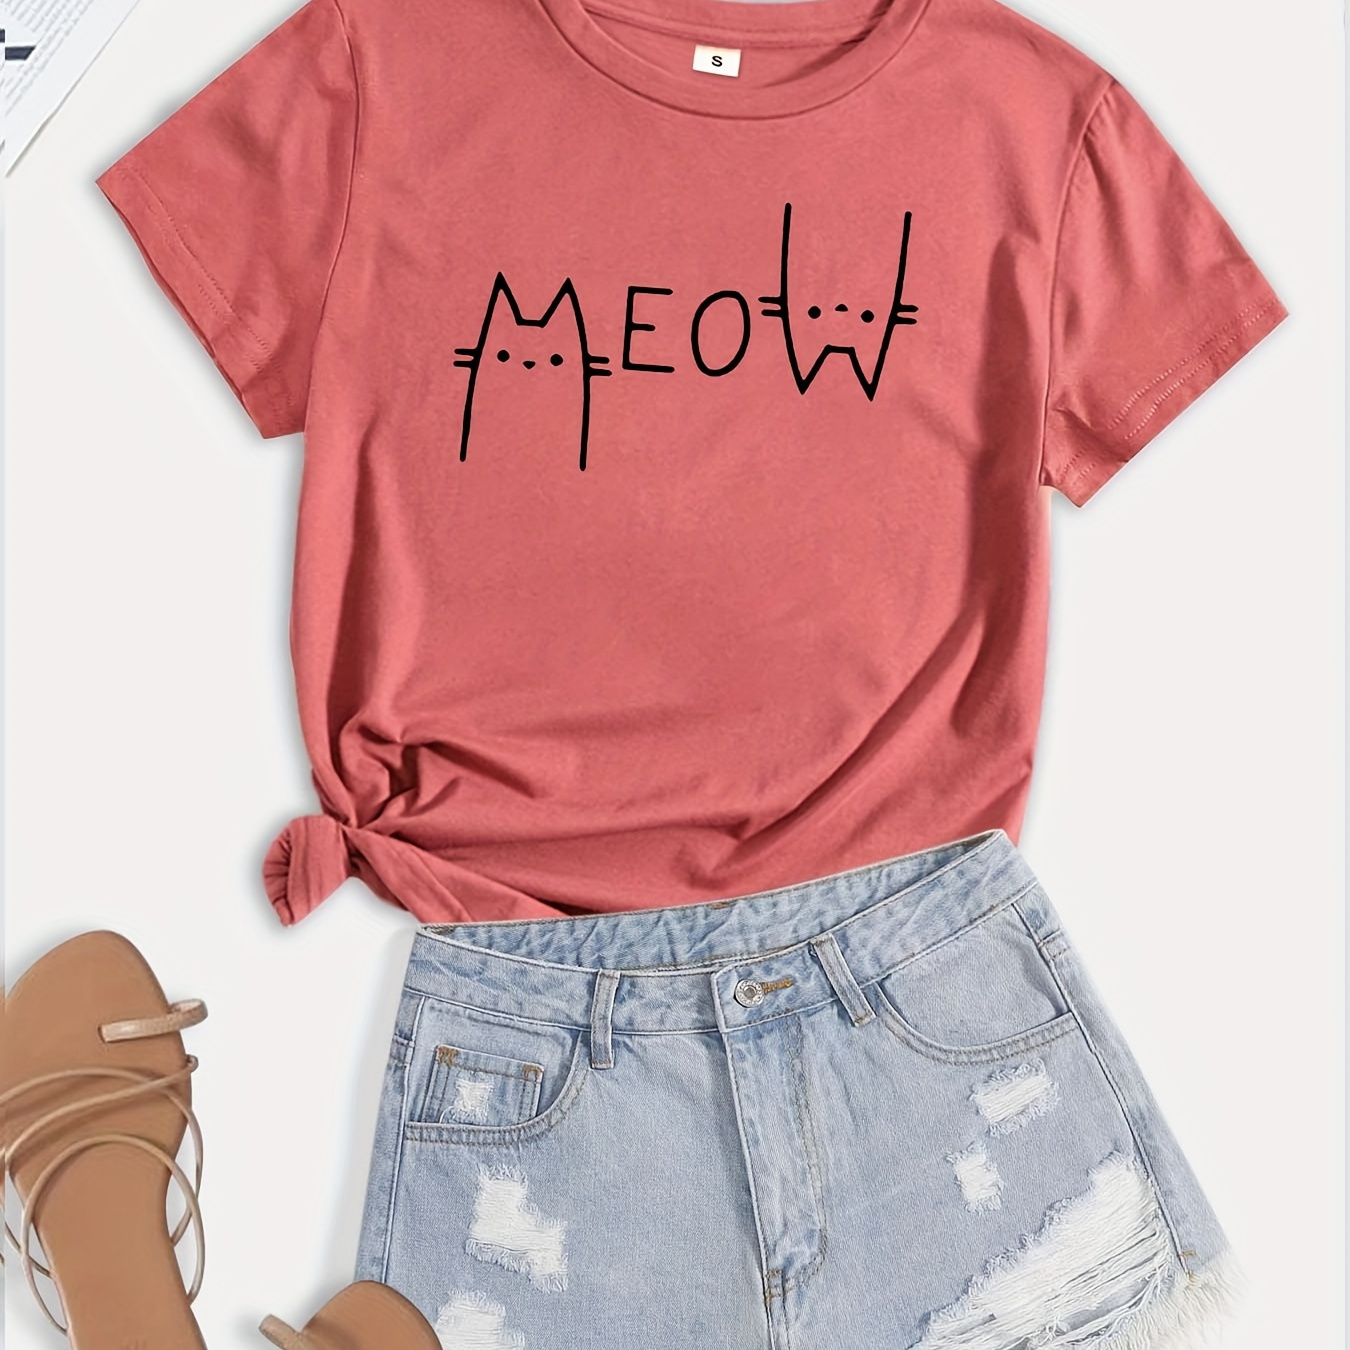 

Meow Print T-shirt, Short Sleeve Crew Neck Casual Top For Summer & Spring, Women's Clothing